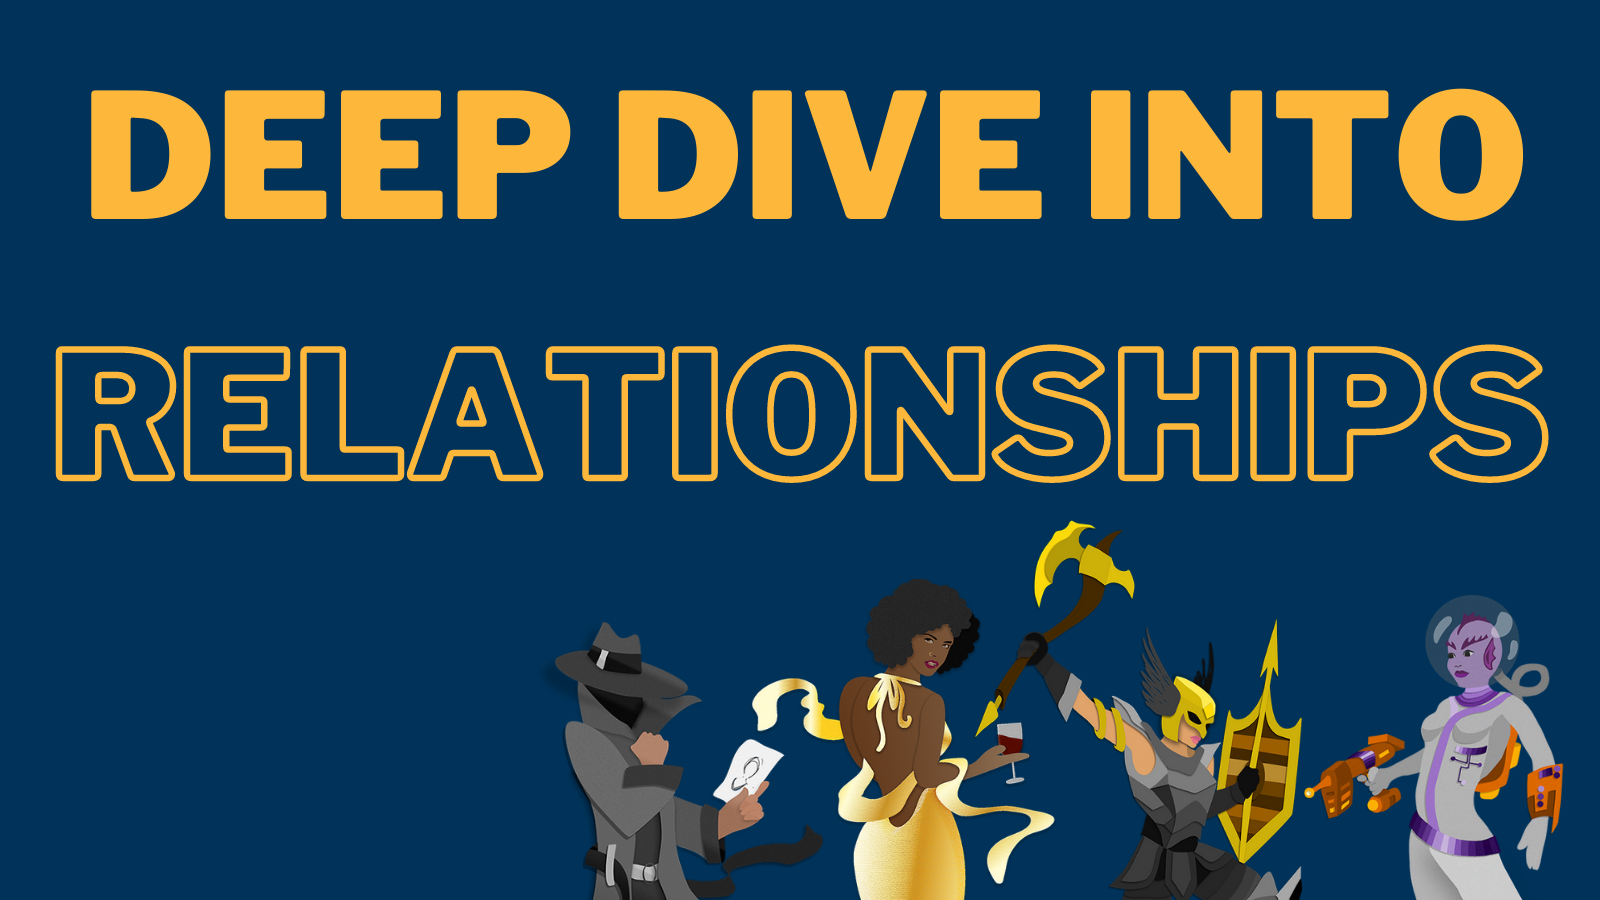 "Deep Dive into Relationships"